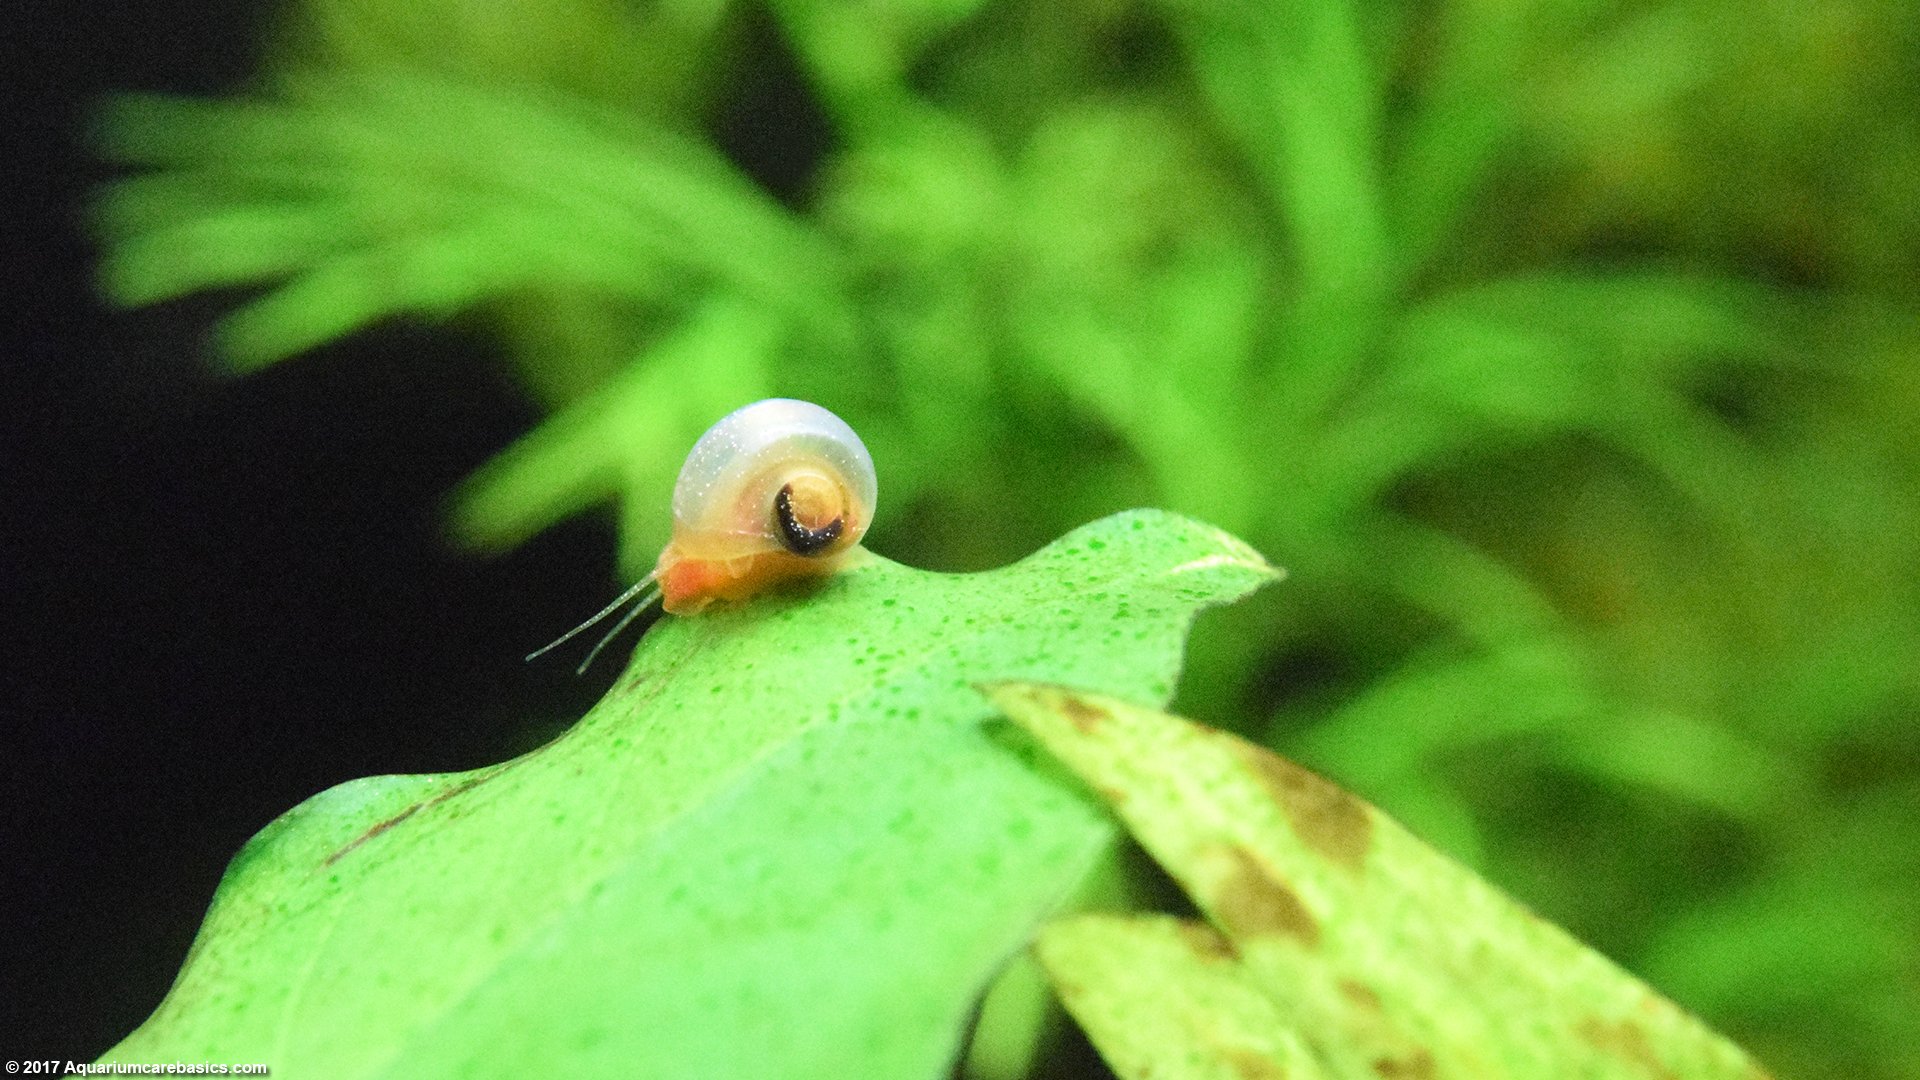 Ramshorn Snail Care, Size, Food, Reproduction, Lifespan - Video